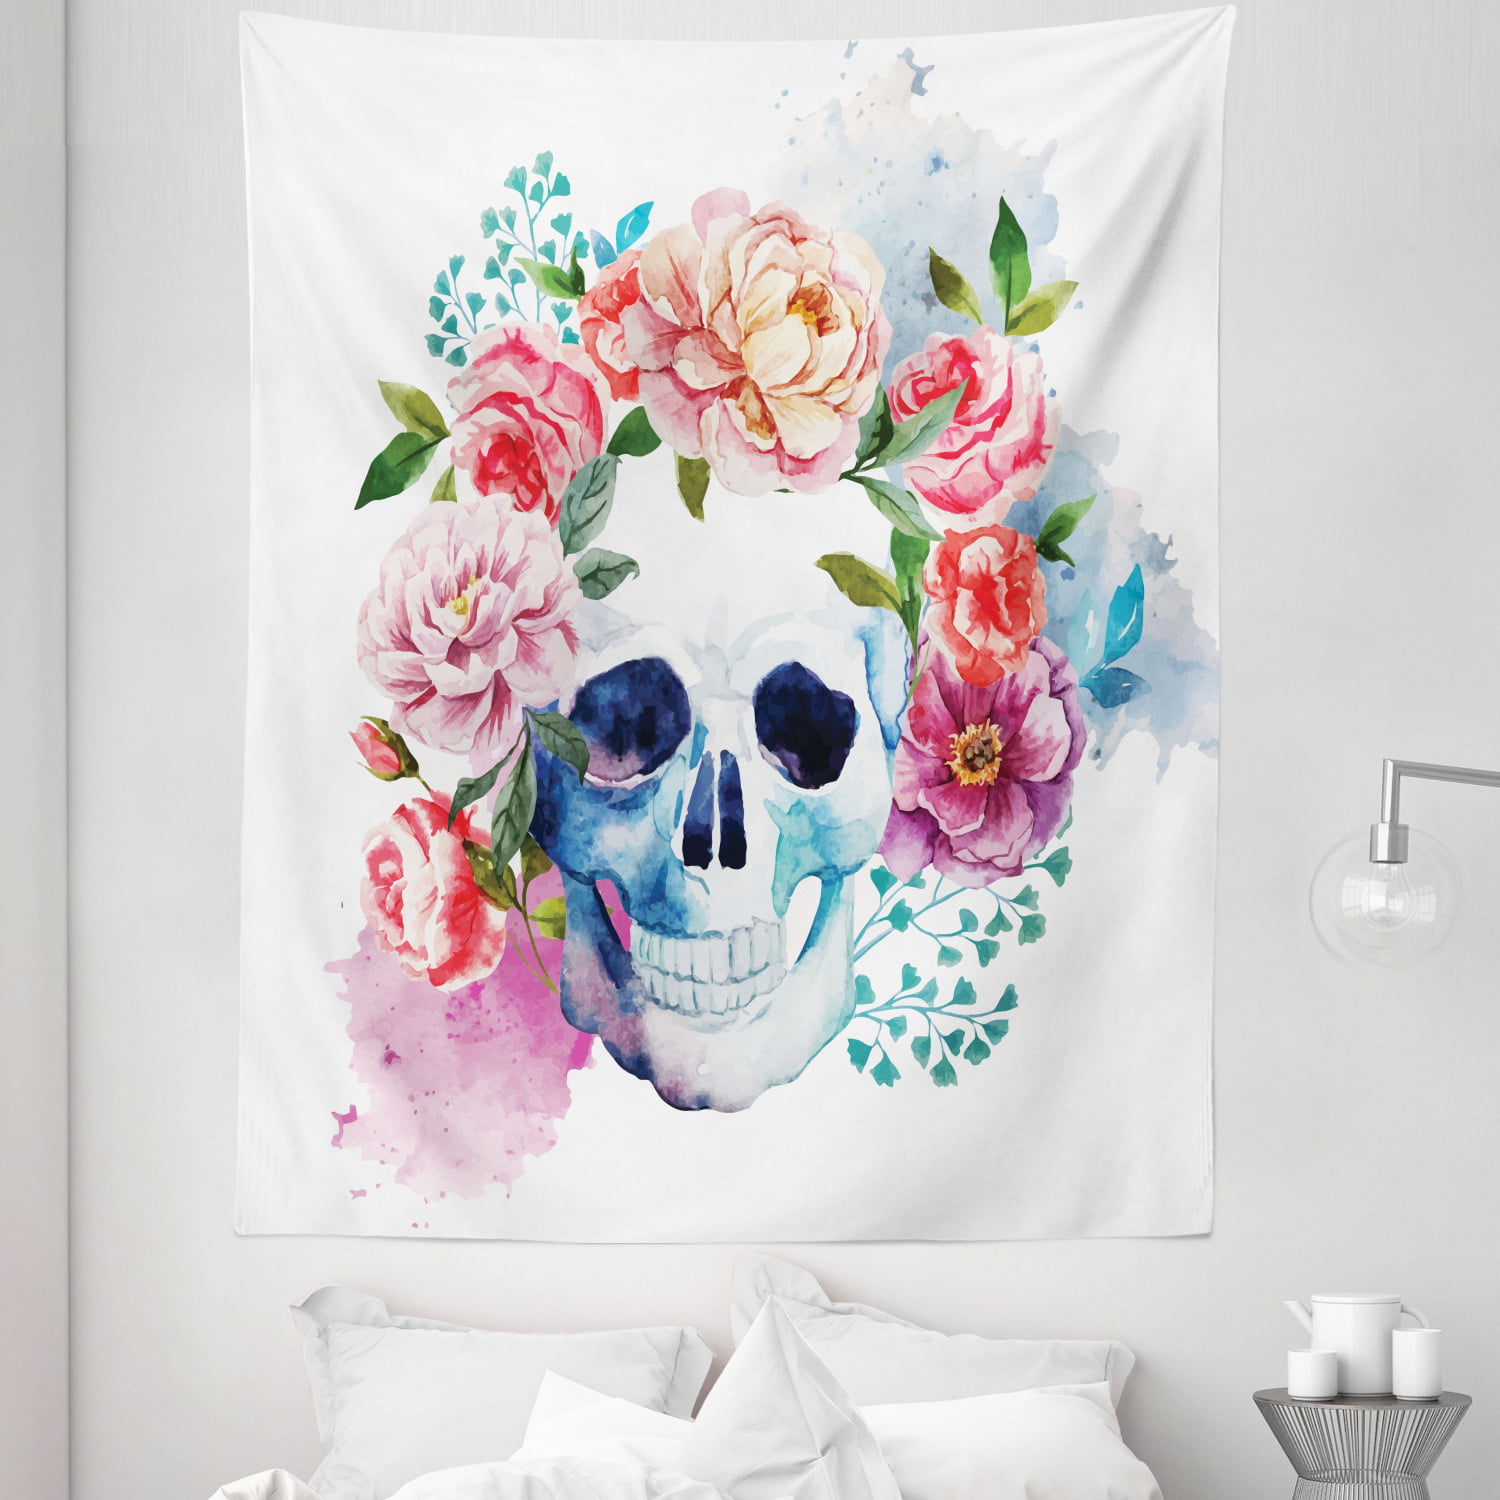 Skull Wear Roses With Trash Can Wall Decor Hanging Tapestry Bohemian Bedspread 